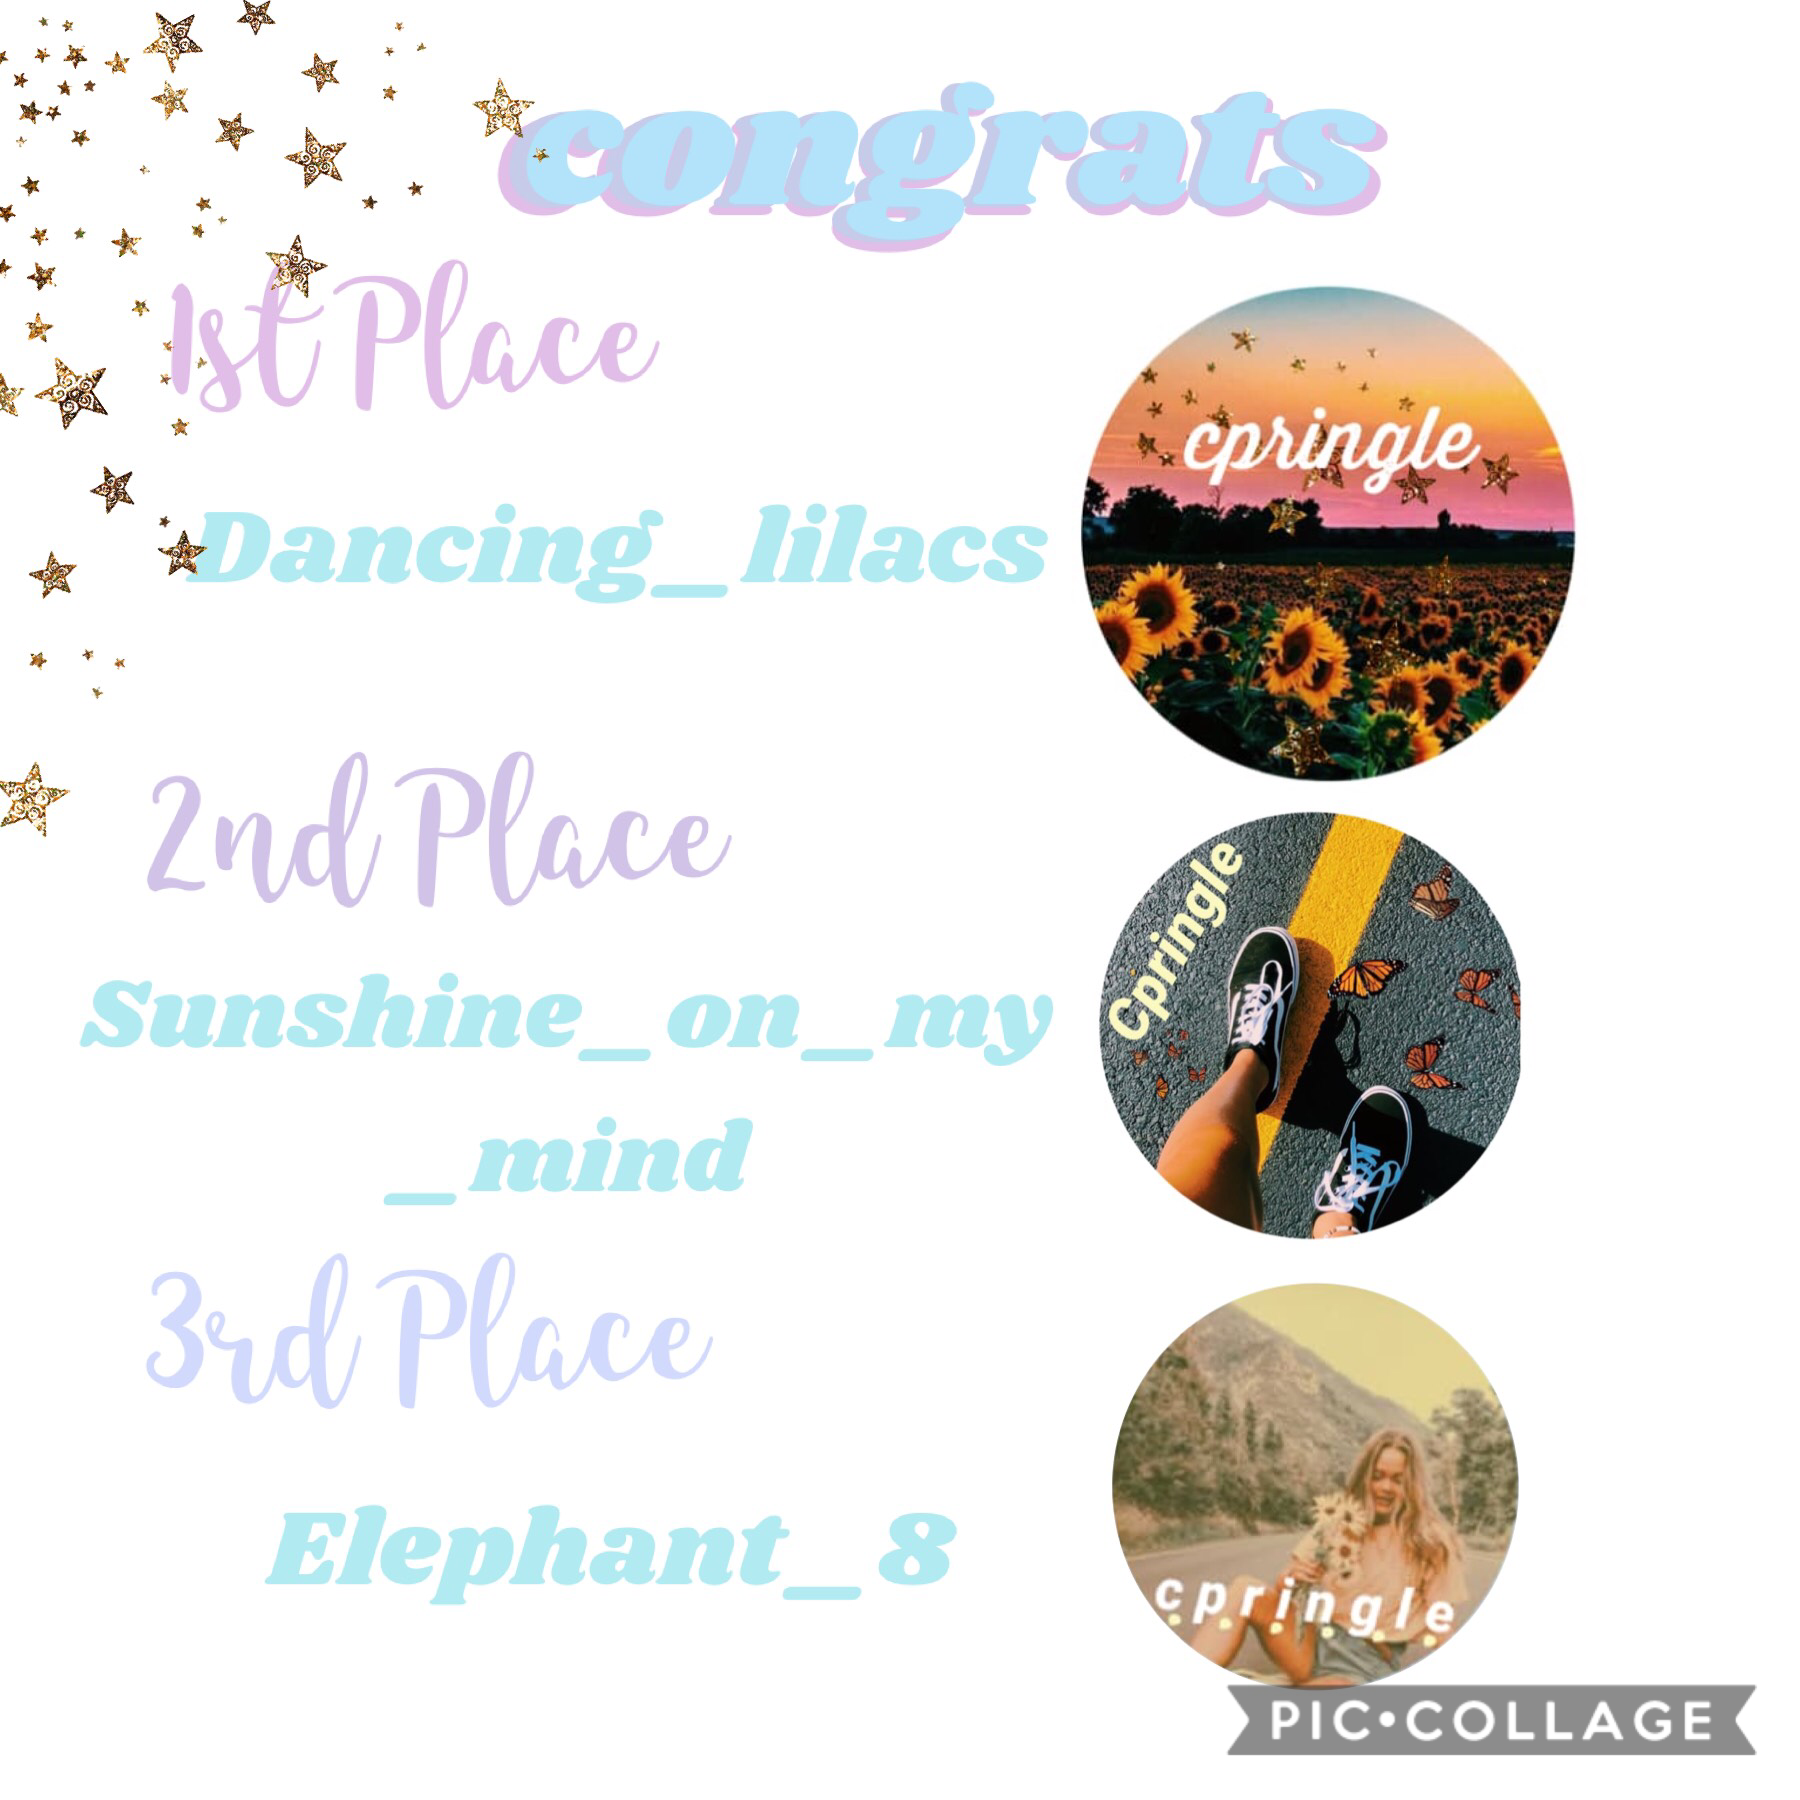 🎉tap🎉
Omg everyone did such a good job
It was actually so hard for me to choose a winner
I literally loved all of them 
I might switch out which ones i use
Thank you Thank you
😘